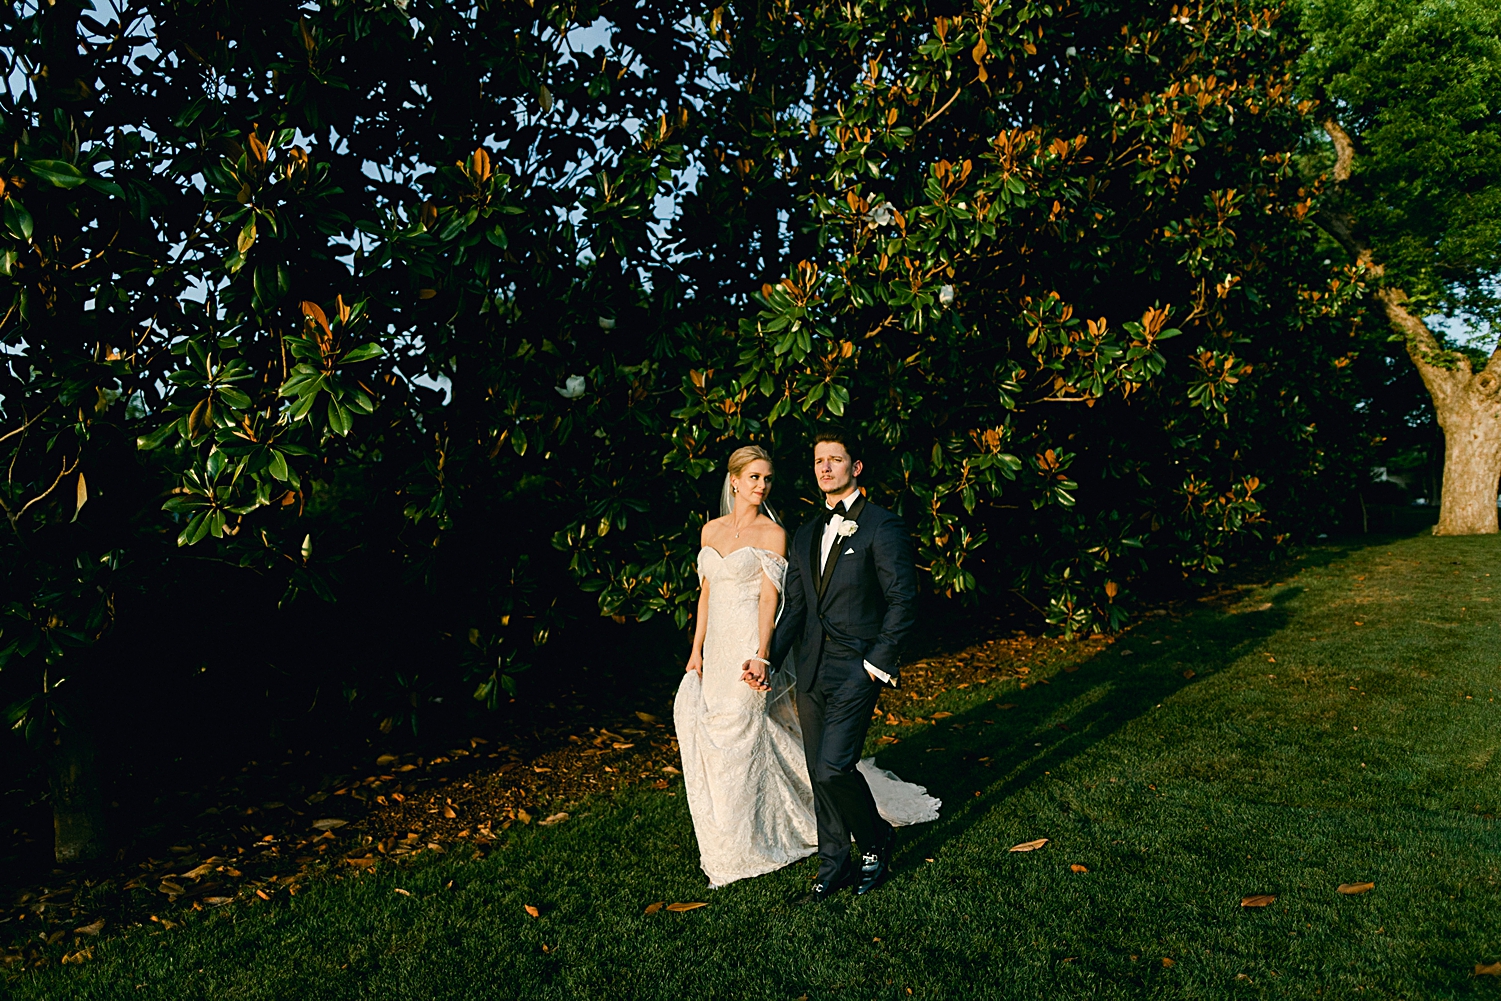 Bride in white wedding dress and veil and Groom in blue tuxedo walking and holding hands in front of magnolia trees at Dallas wedding